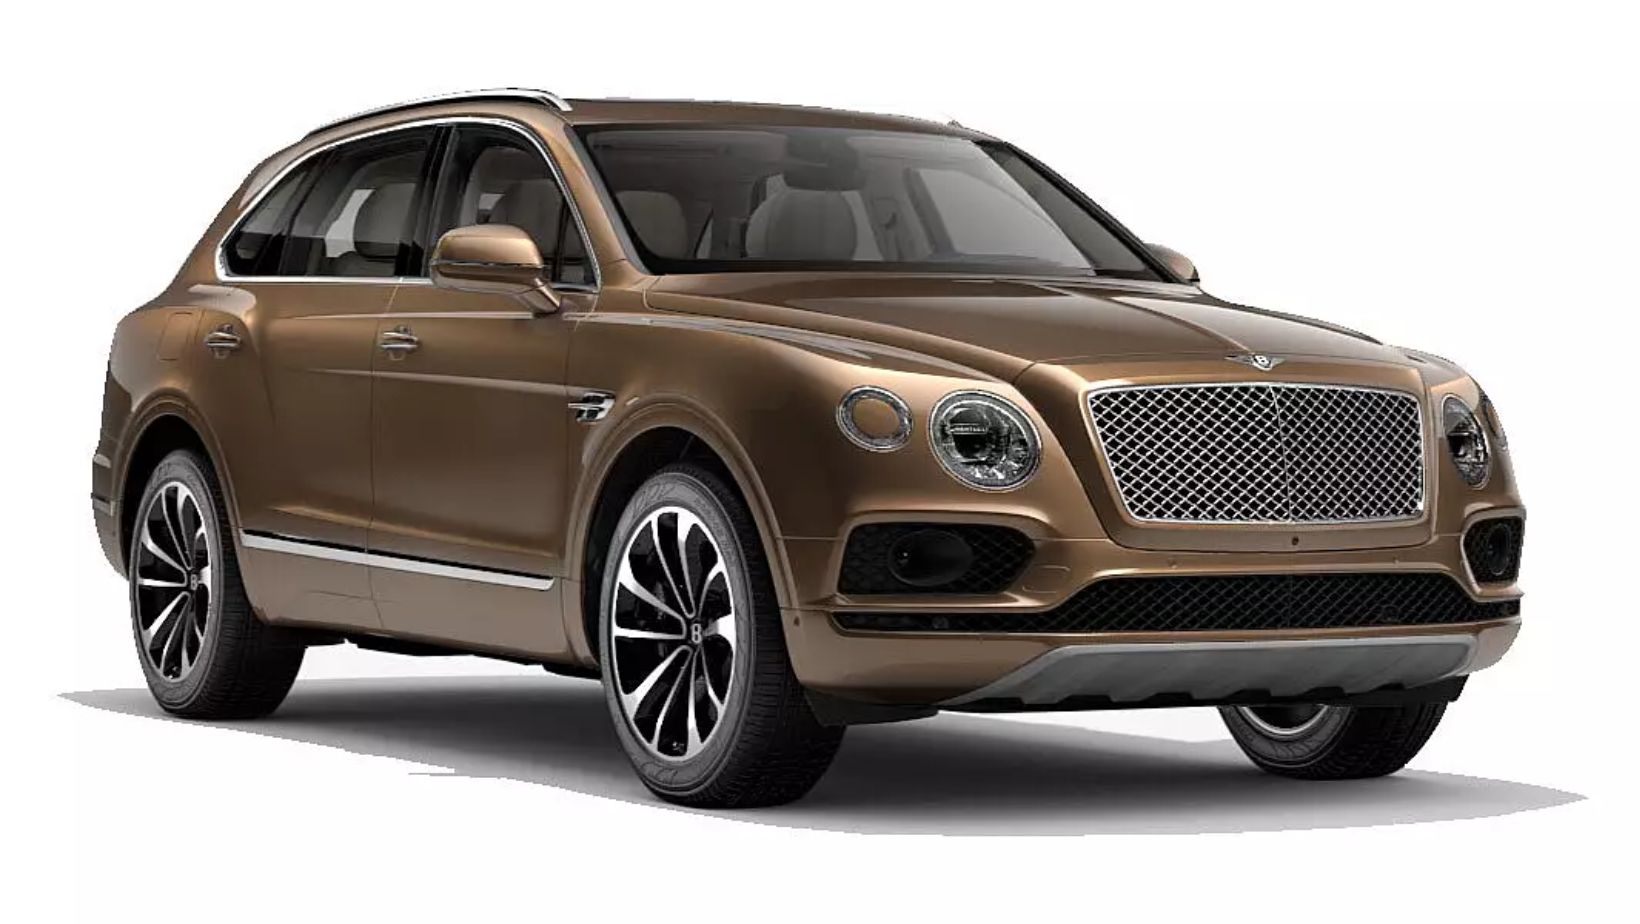 Bentley Bentayga – Price, Launch Date, Top Speed, and Review